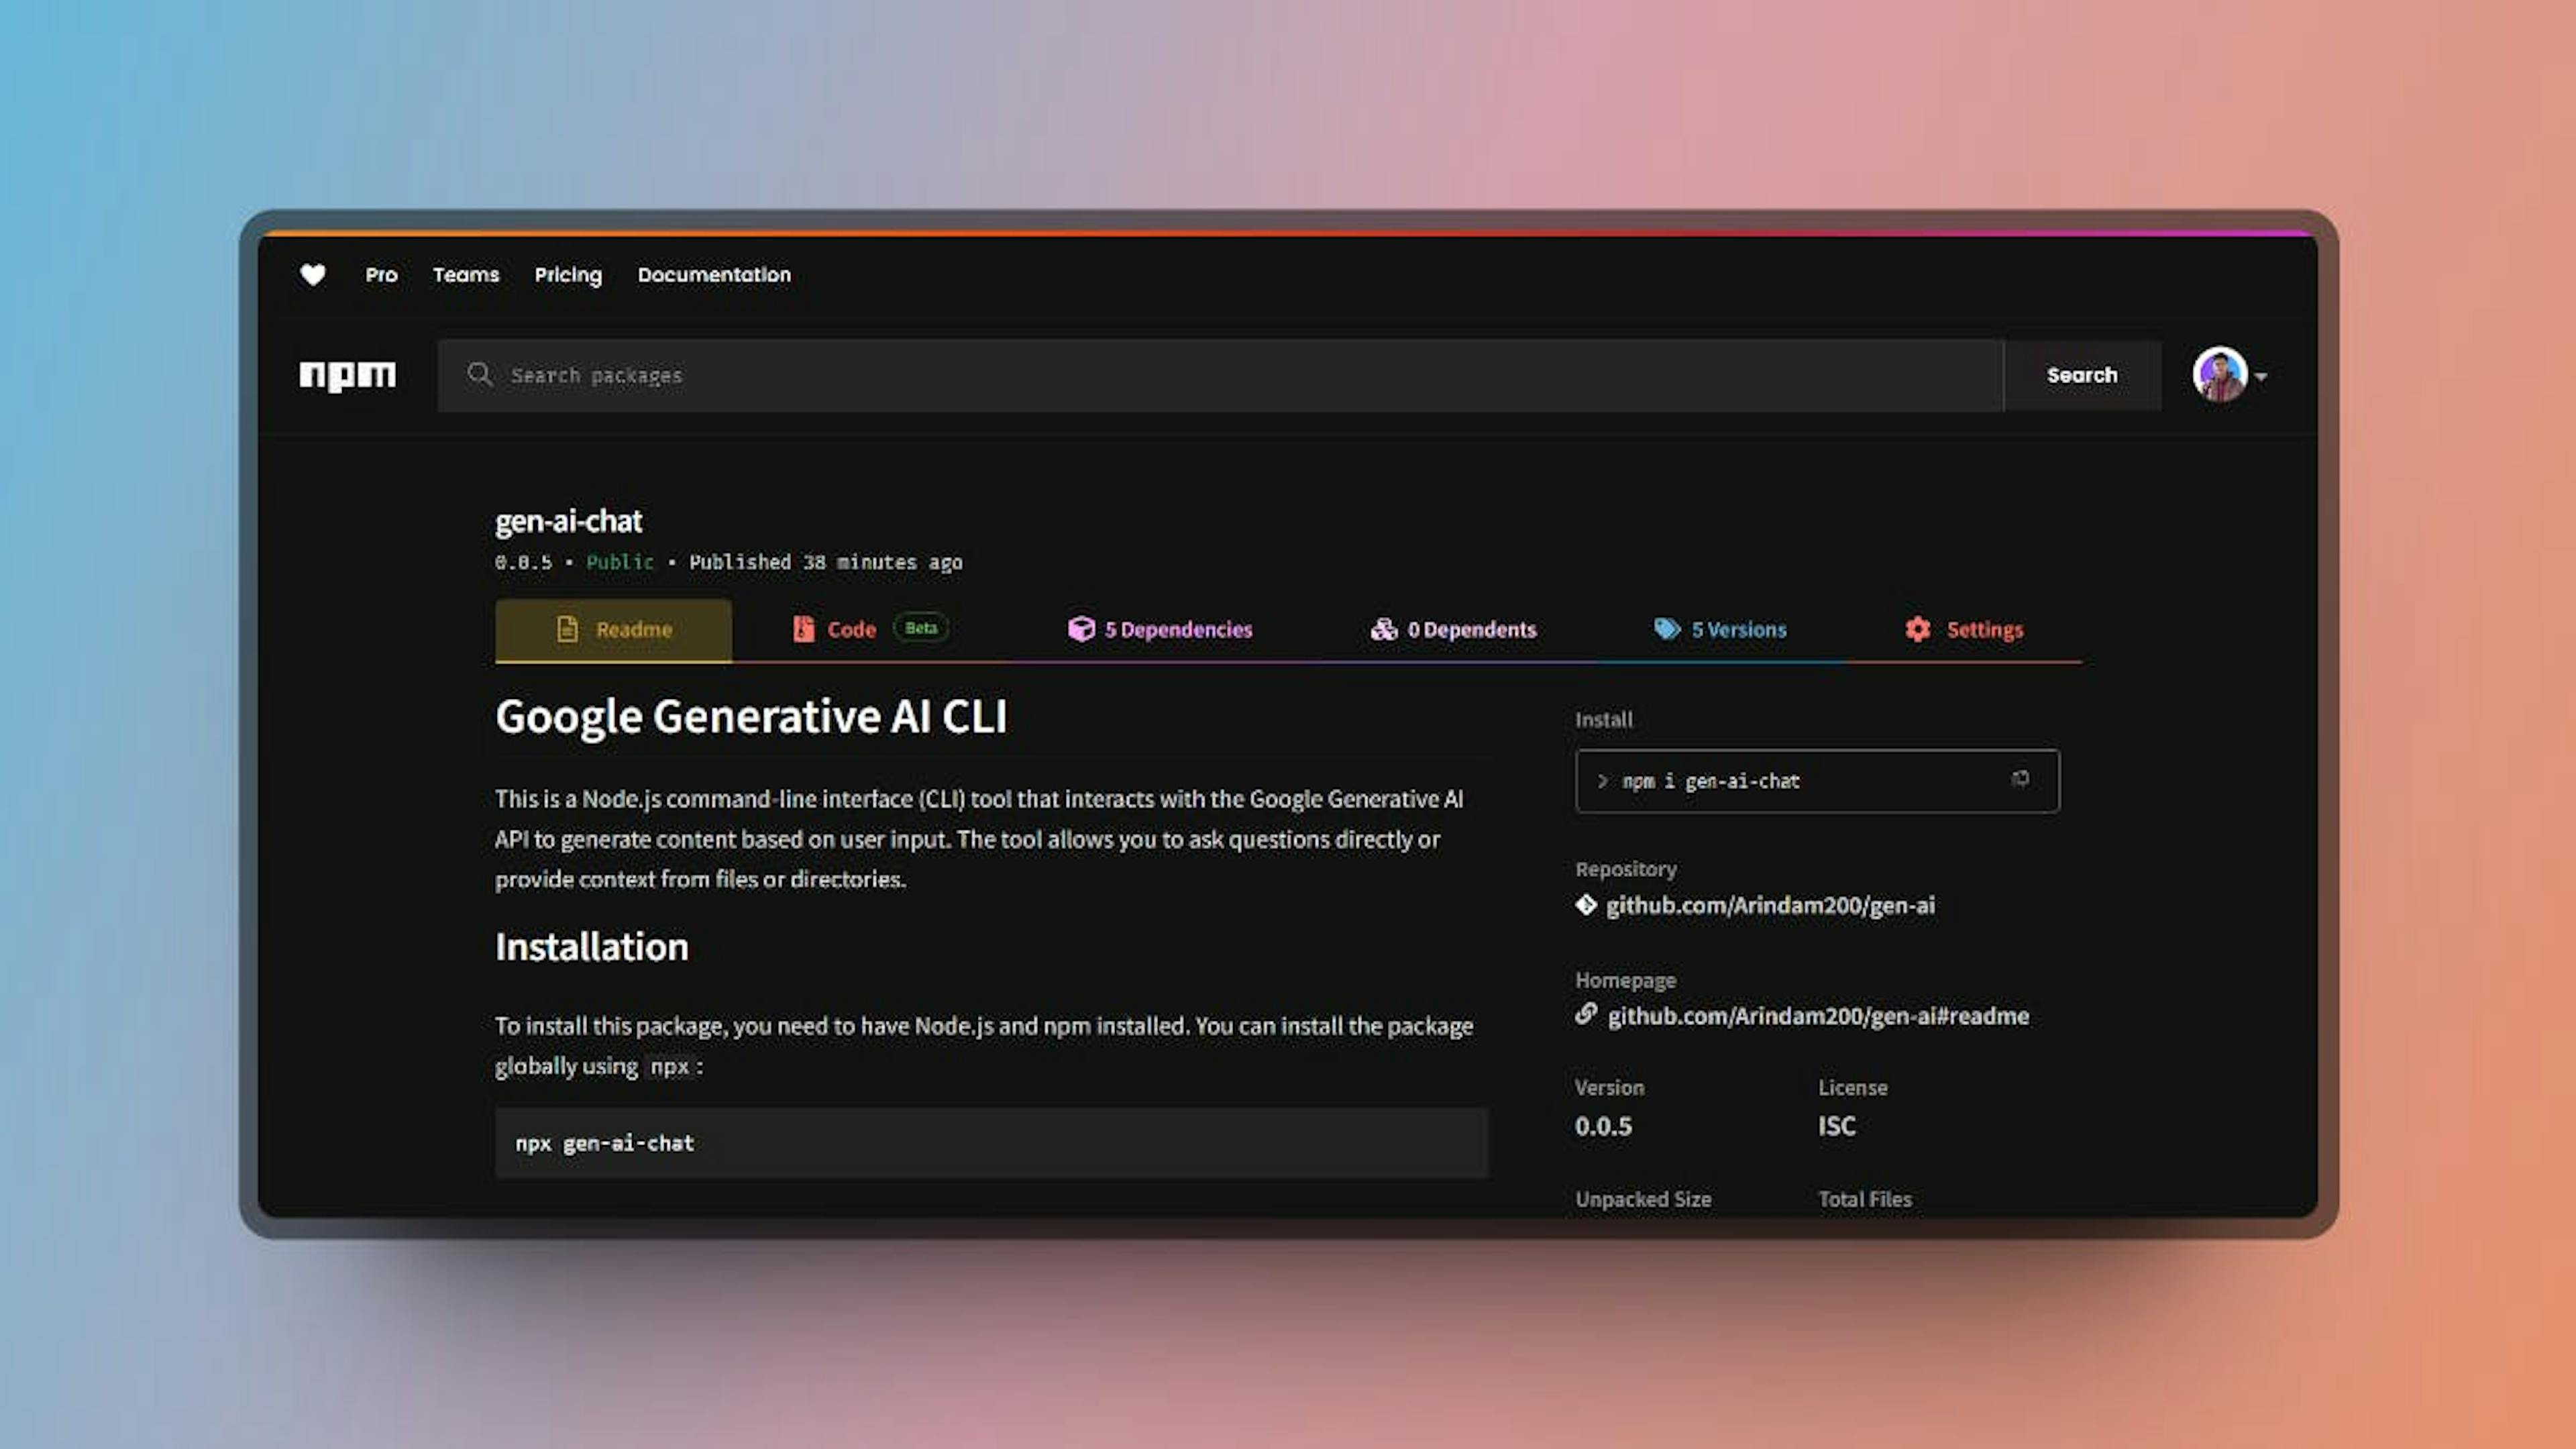 Screenshot of the npm package page for "gen-ai-chat," a Google Generative AI CLI. The page includes package details such as version 0.0.5, installation instructions, repository link, and dependencies. The page has a dark theme with options for Readme, Code, Dependencies, Versions, and Settings.